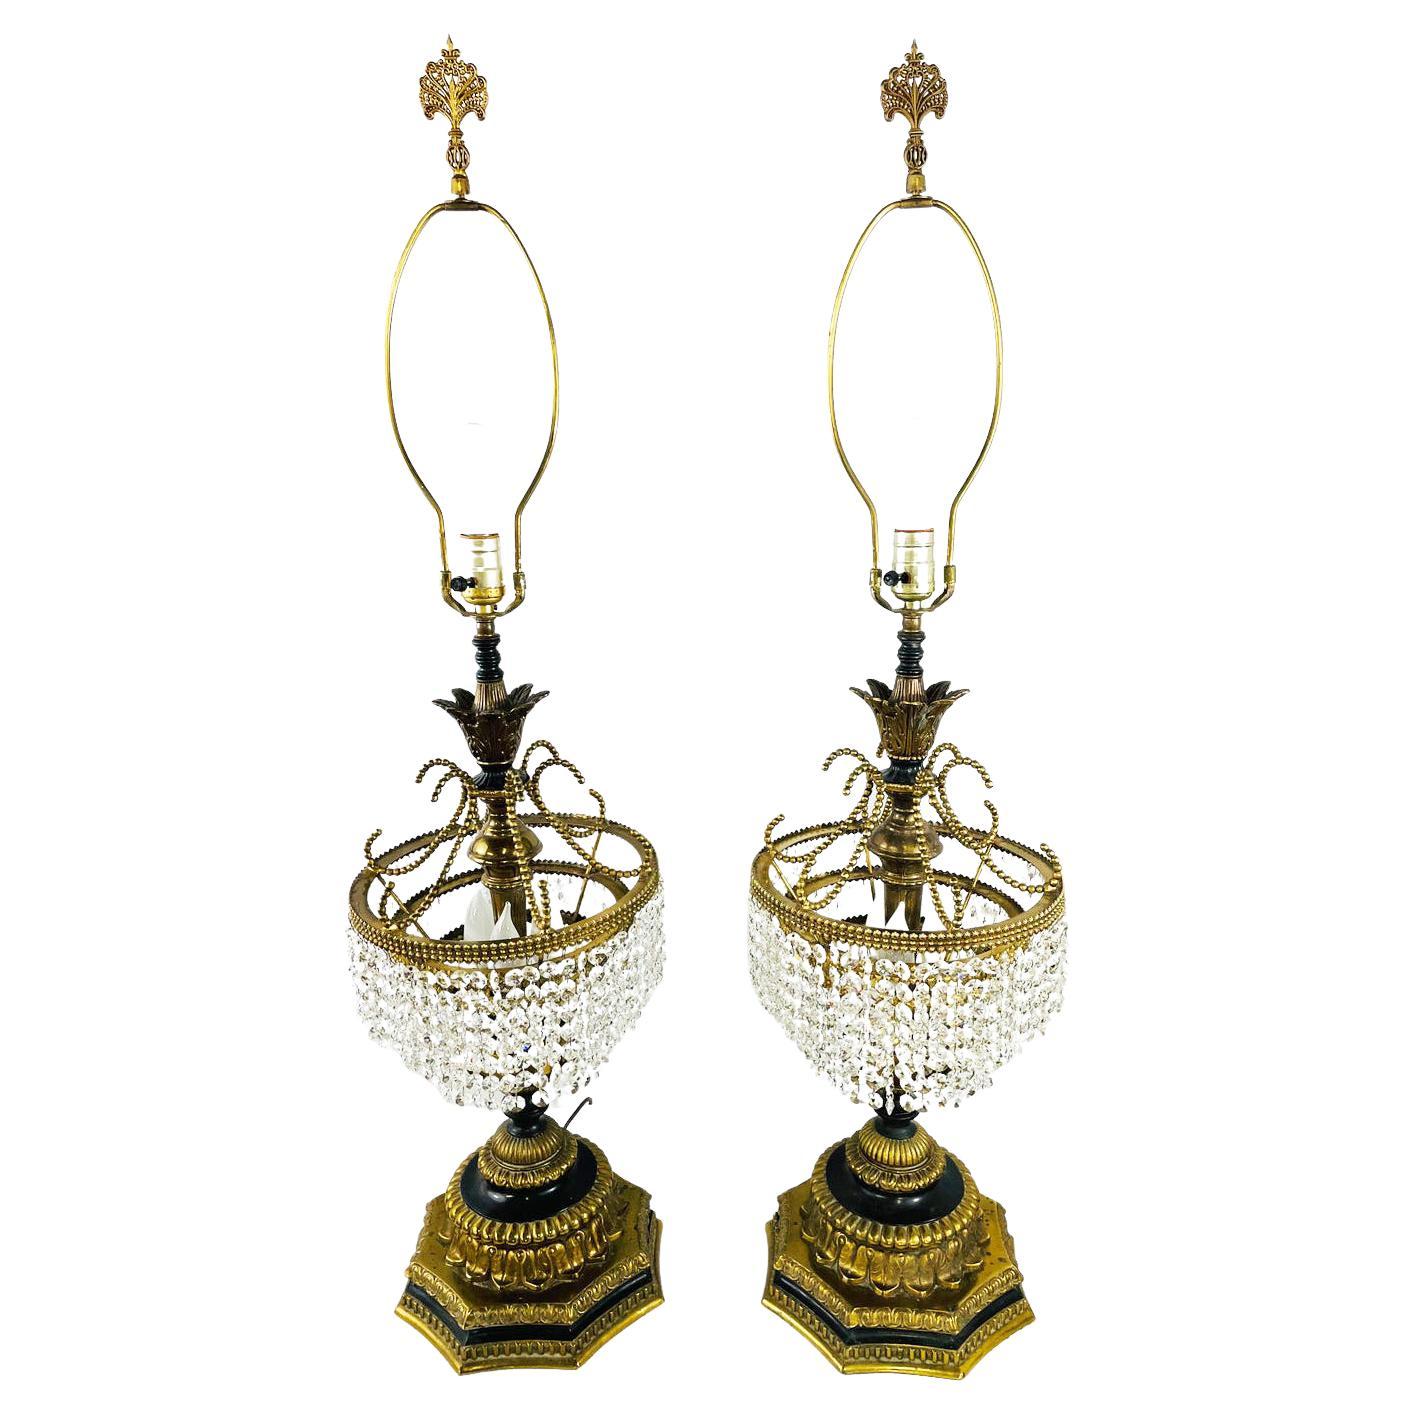 French Empire Hollywood Regency Bronze and Crystal Table Lamp, a Pair For Sale